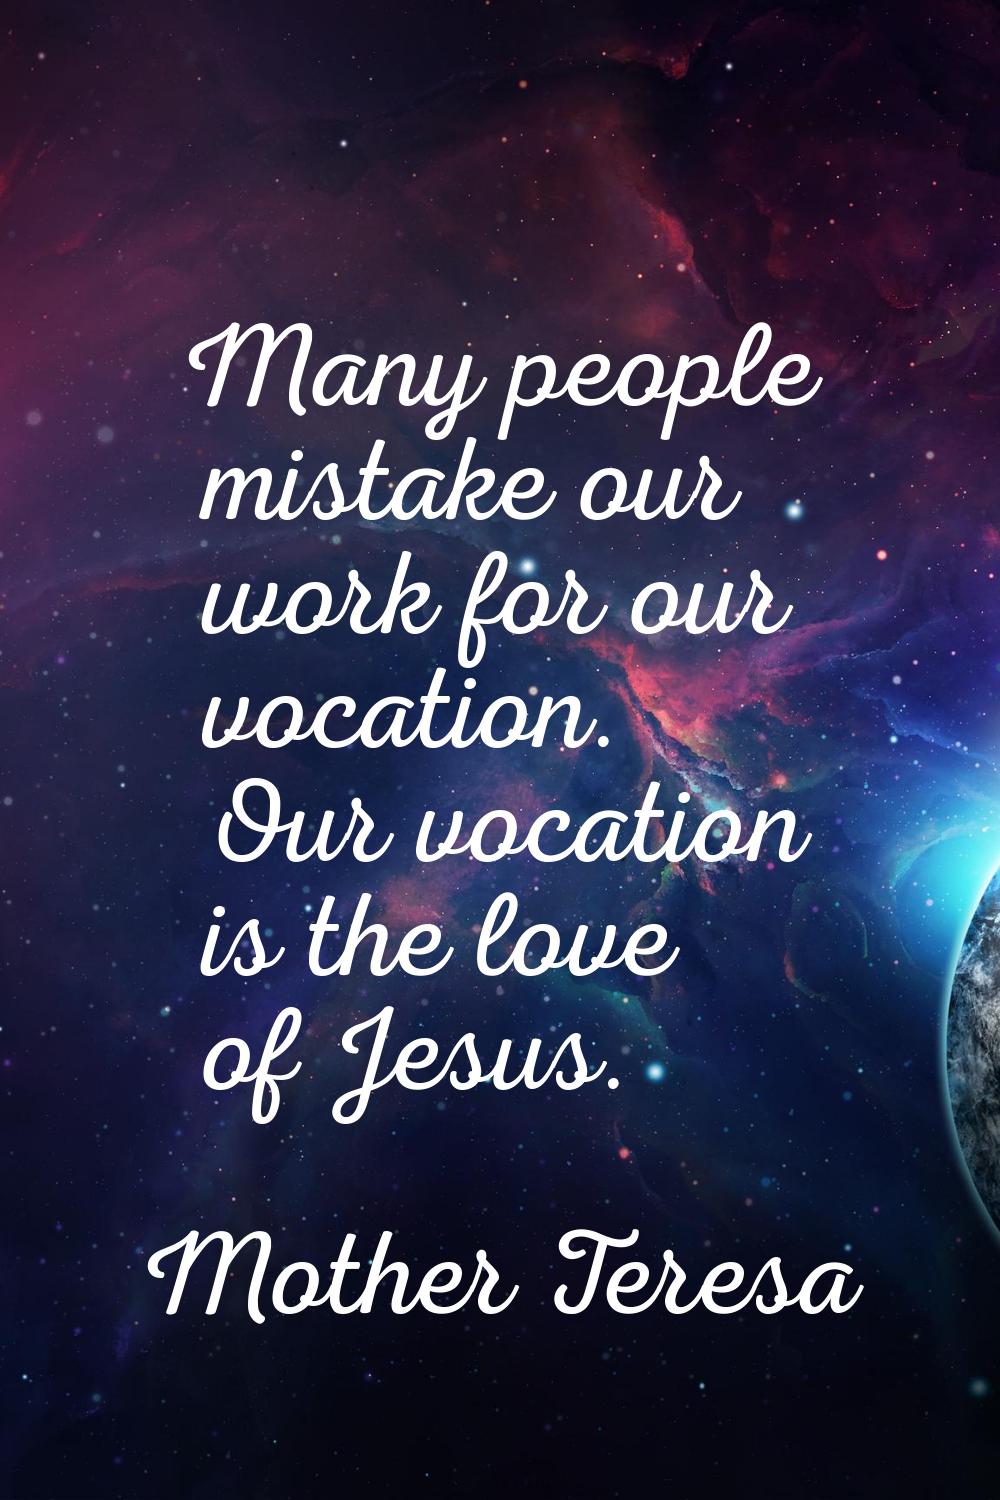 Many people mistake our work for our vocation. Our vocation is the love of Jesus.